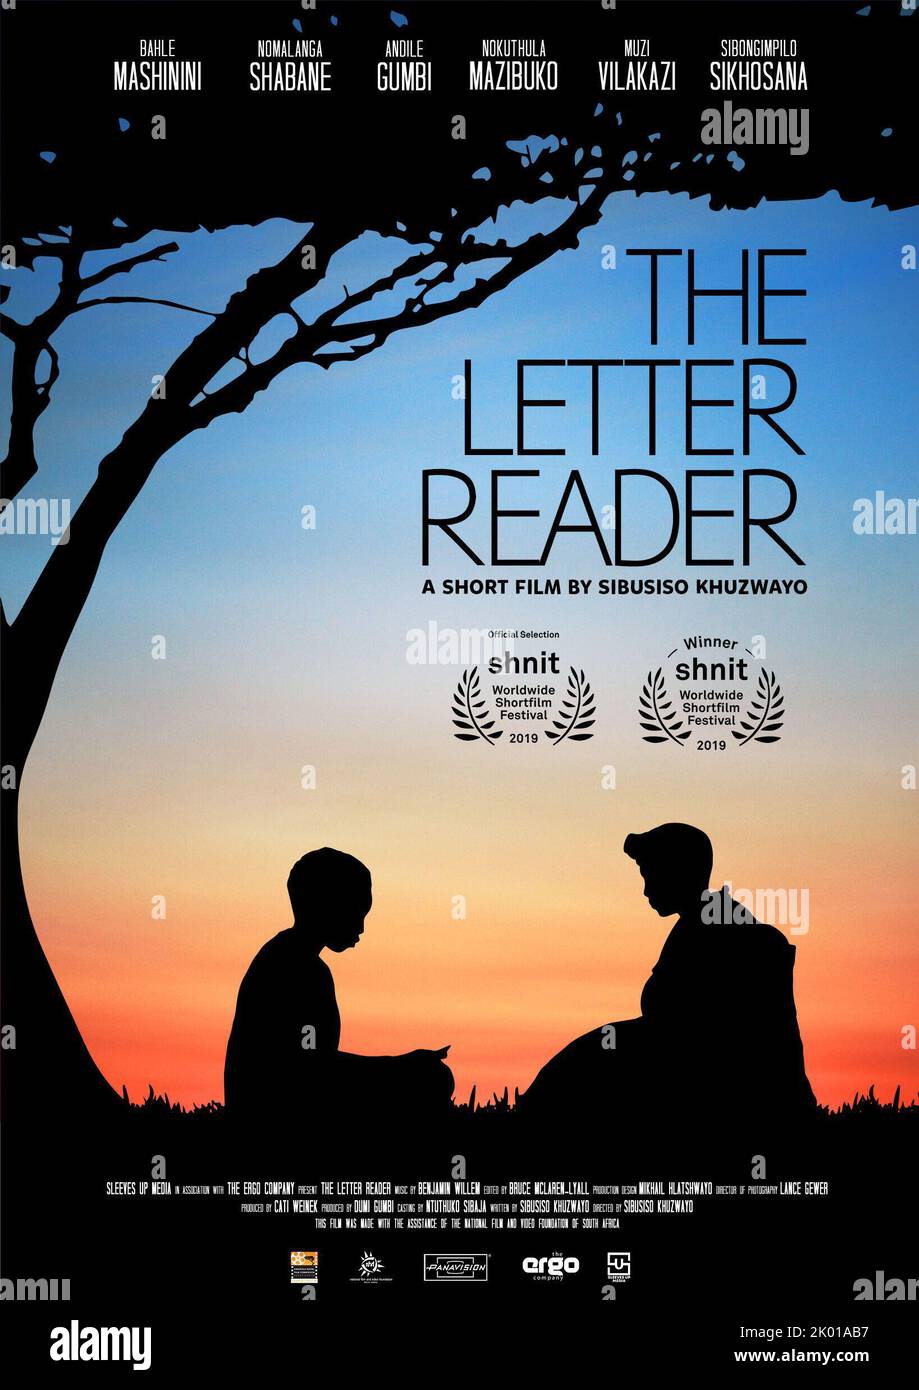 THE LETTER READER, directed by SIBUSISO KHUZWAYO. Credit: The Ergo Company / Album Stock Photo